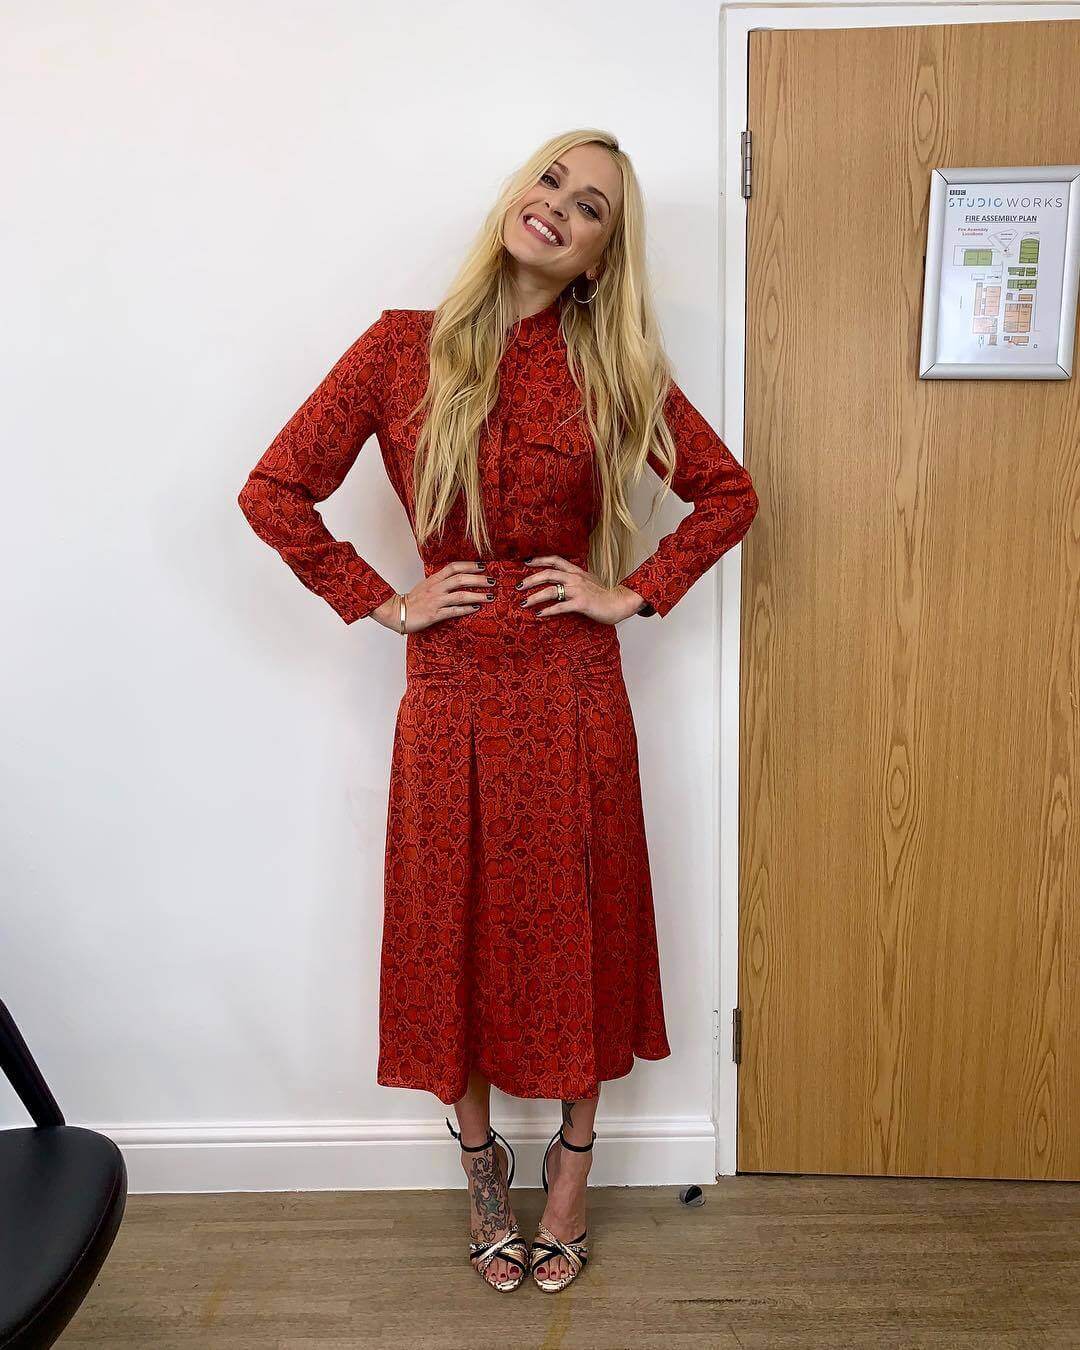 49 Hot Pictures Of Fearne Cotton Will Drive You Nuts For Her | Best Of Comic Books